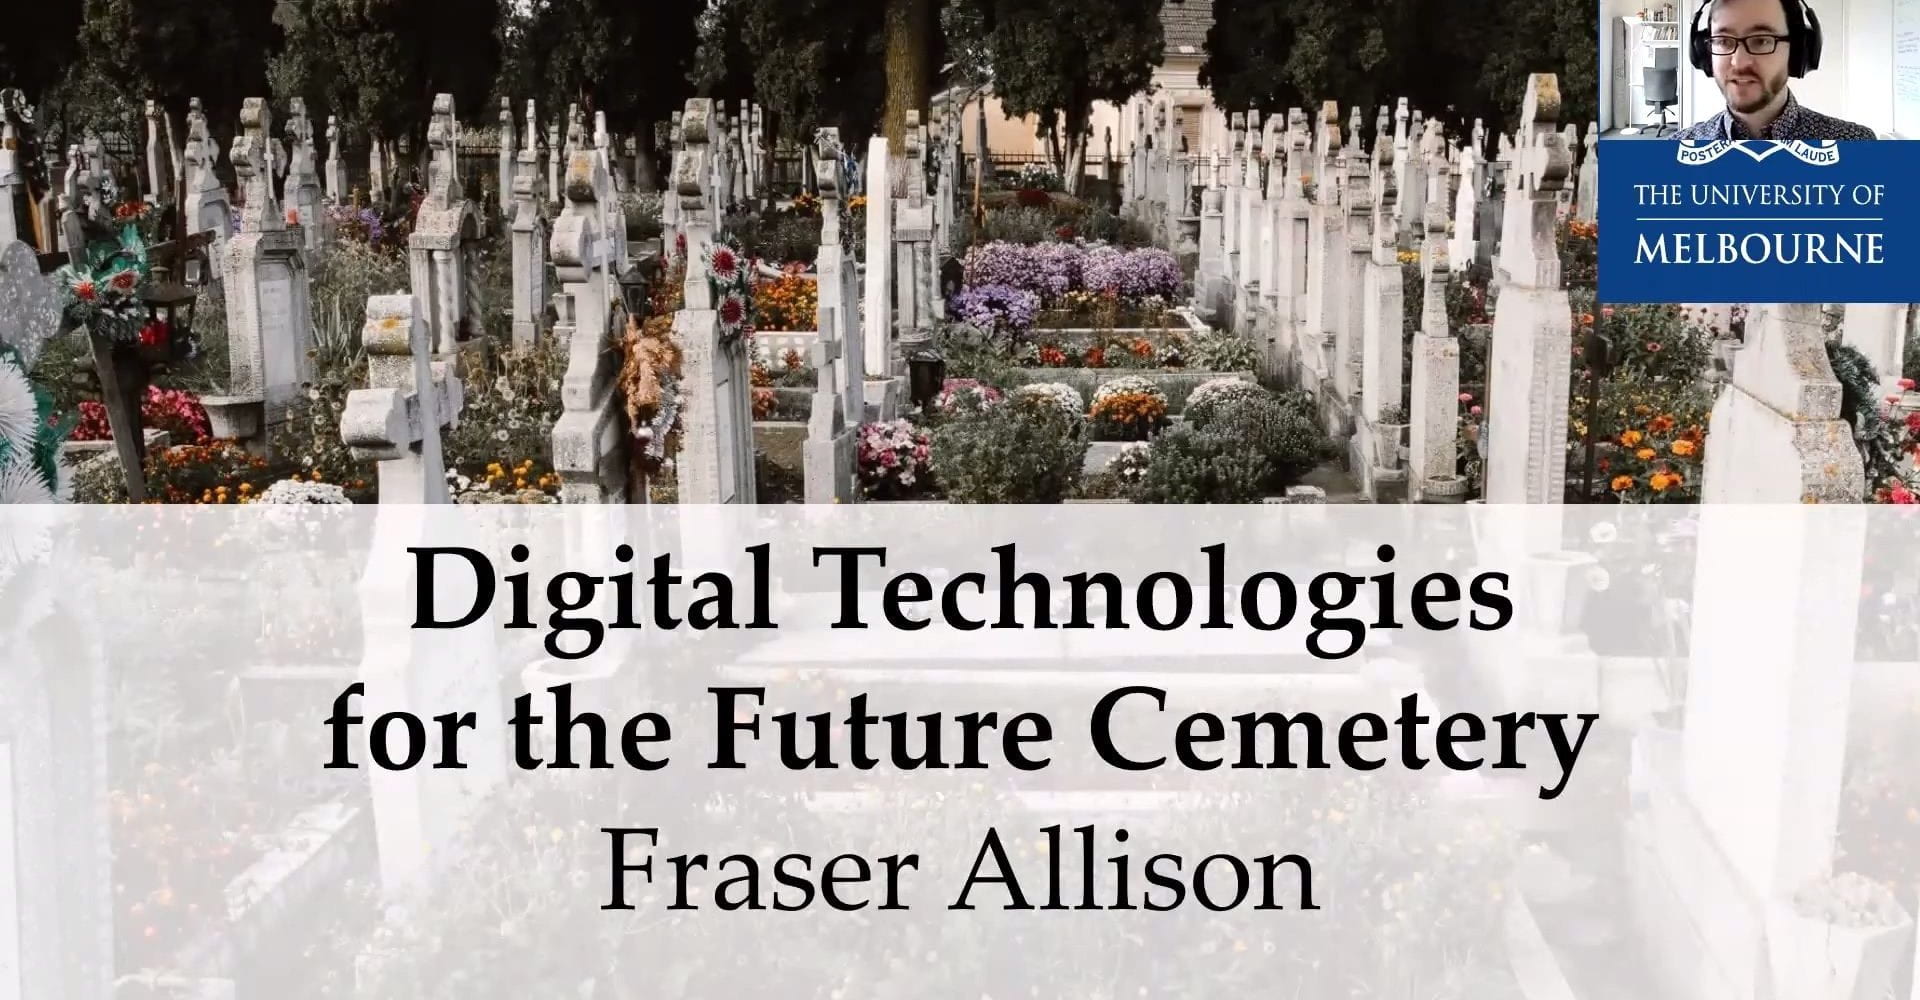 Screenshot from Digital Technologies for the Future Cemetery seminar